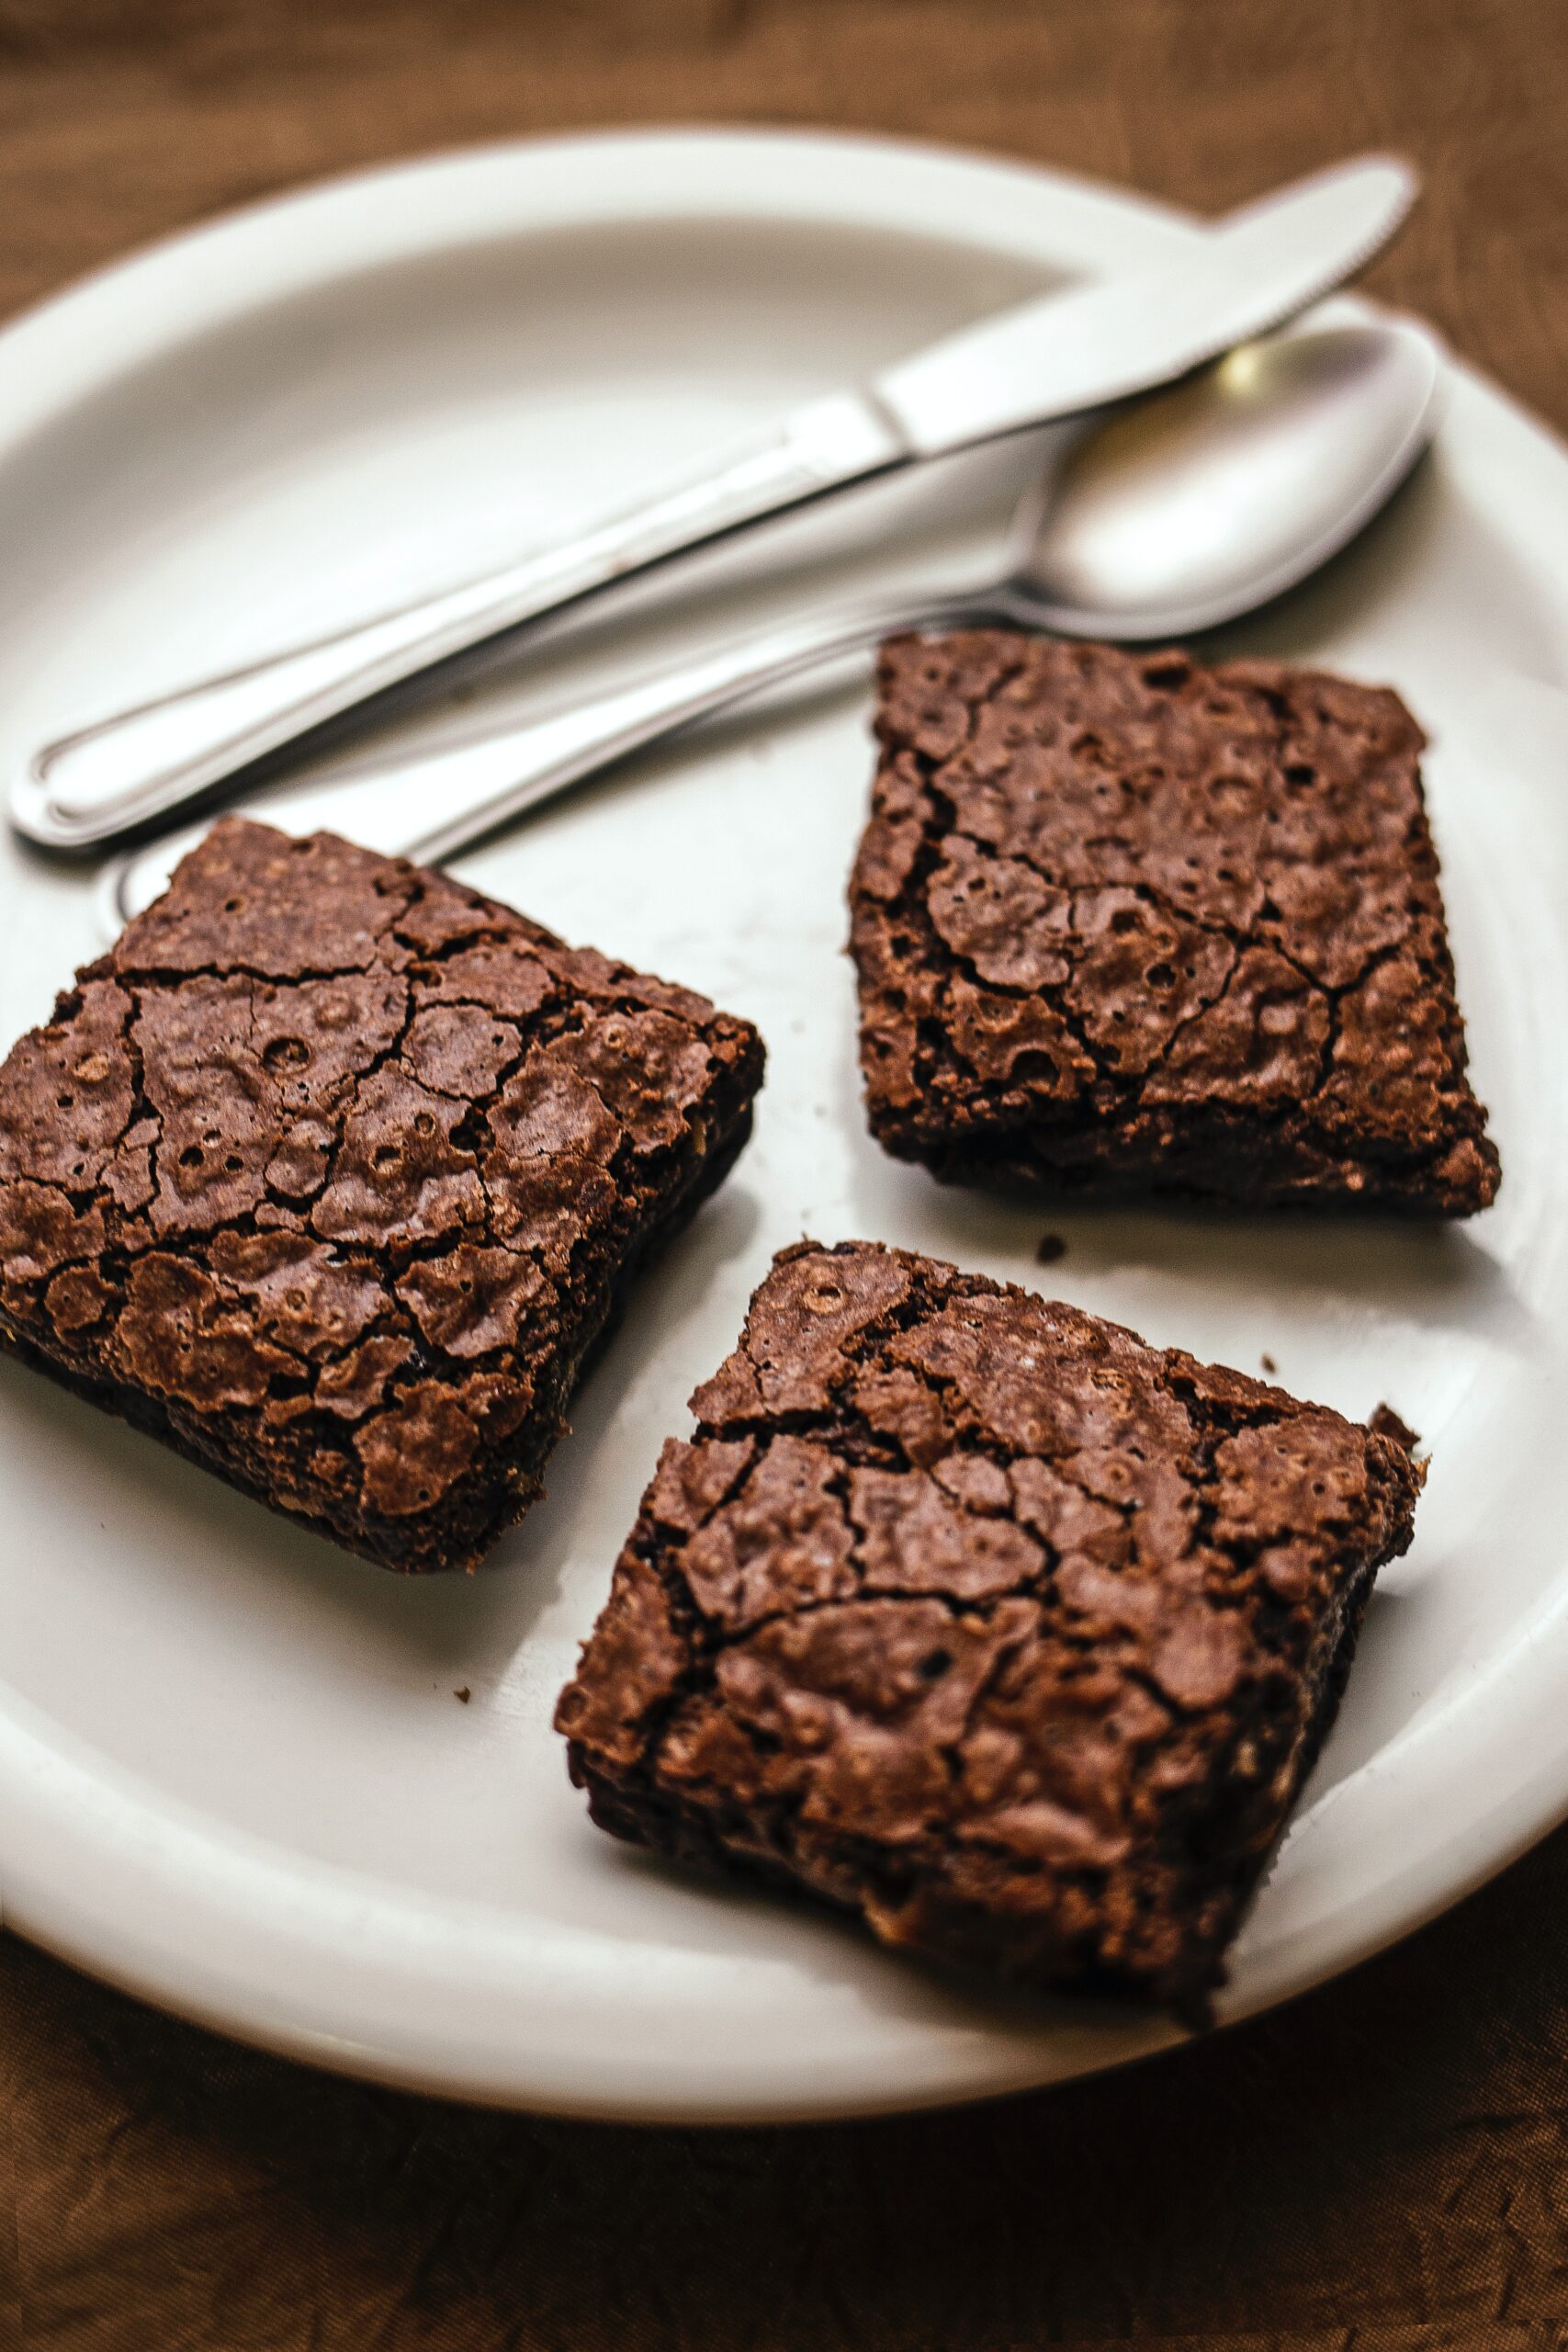 Substitutes for Butter in Brownies